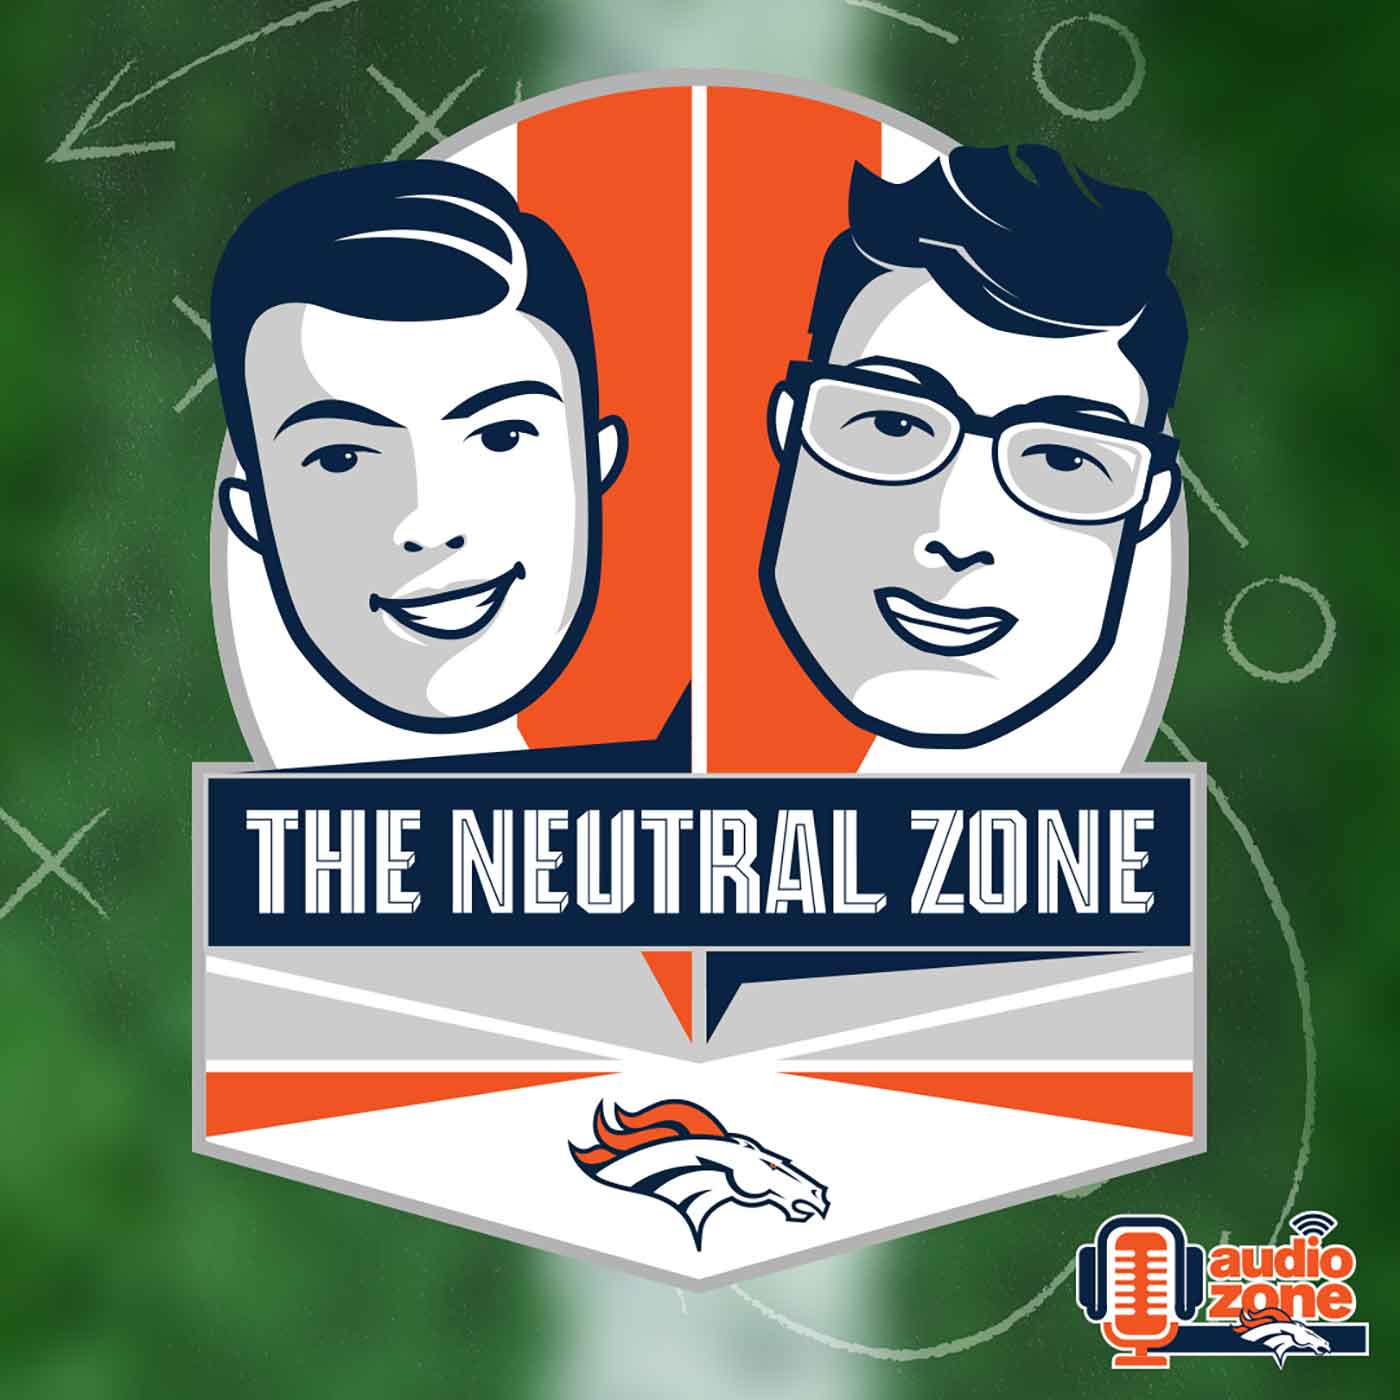 The Neutral Zone: How Nik Bonitto, Broncos' pass rushers can make impact vs. Jets and beyond